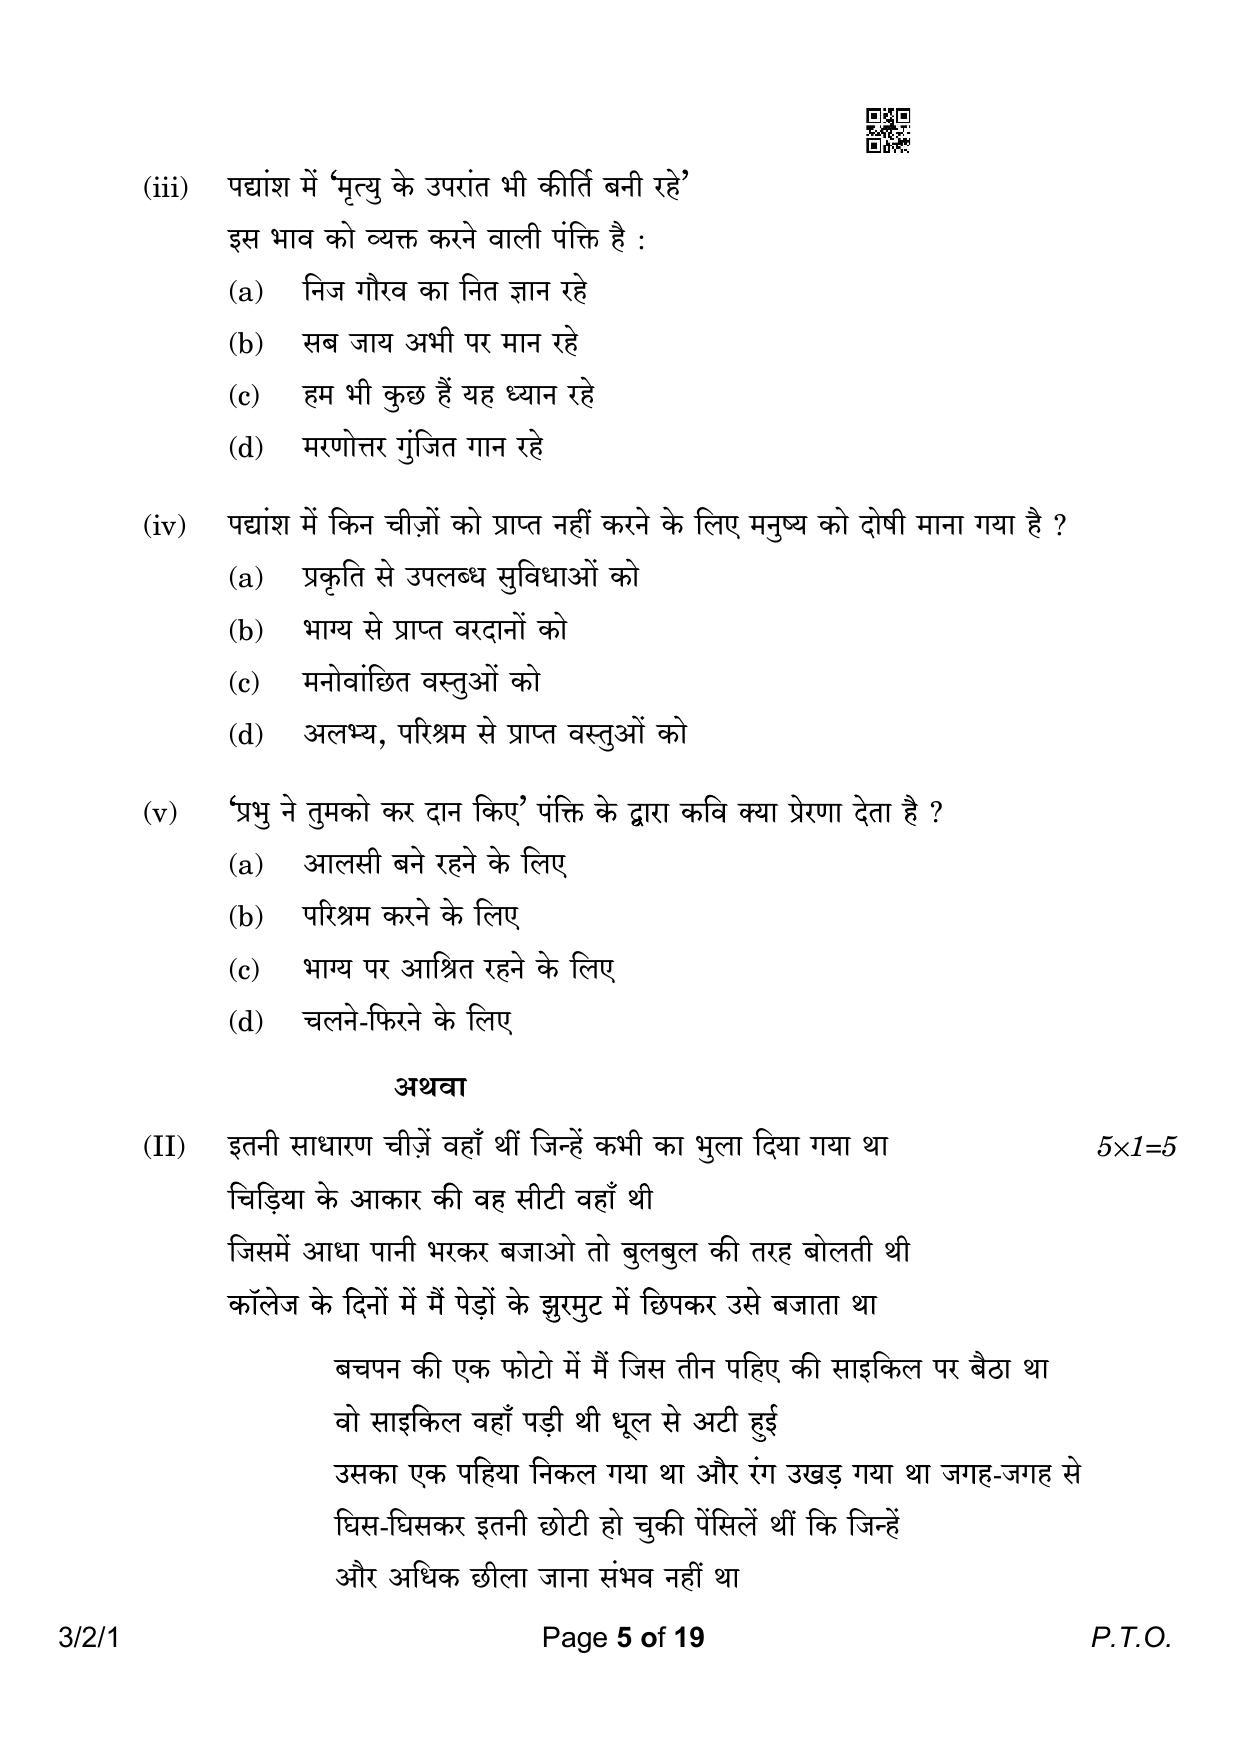 CBSE Class 10 3-2-1 Hindi A 2023 Question Paper - Page 5